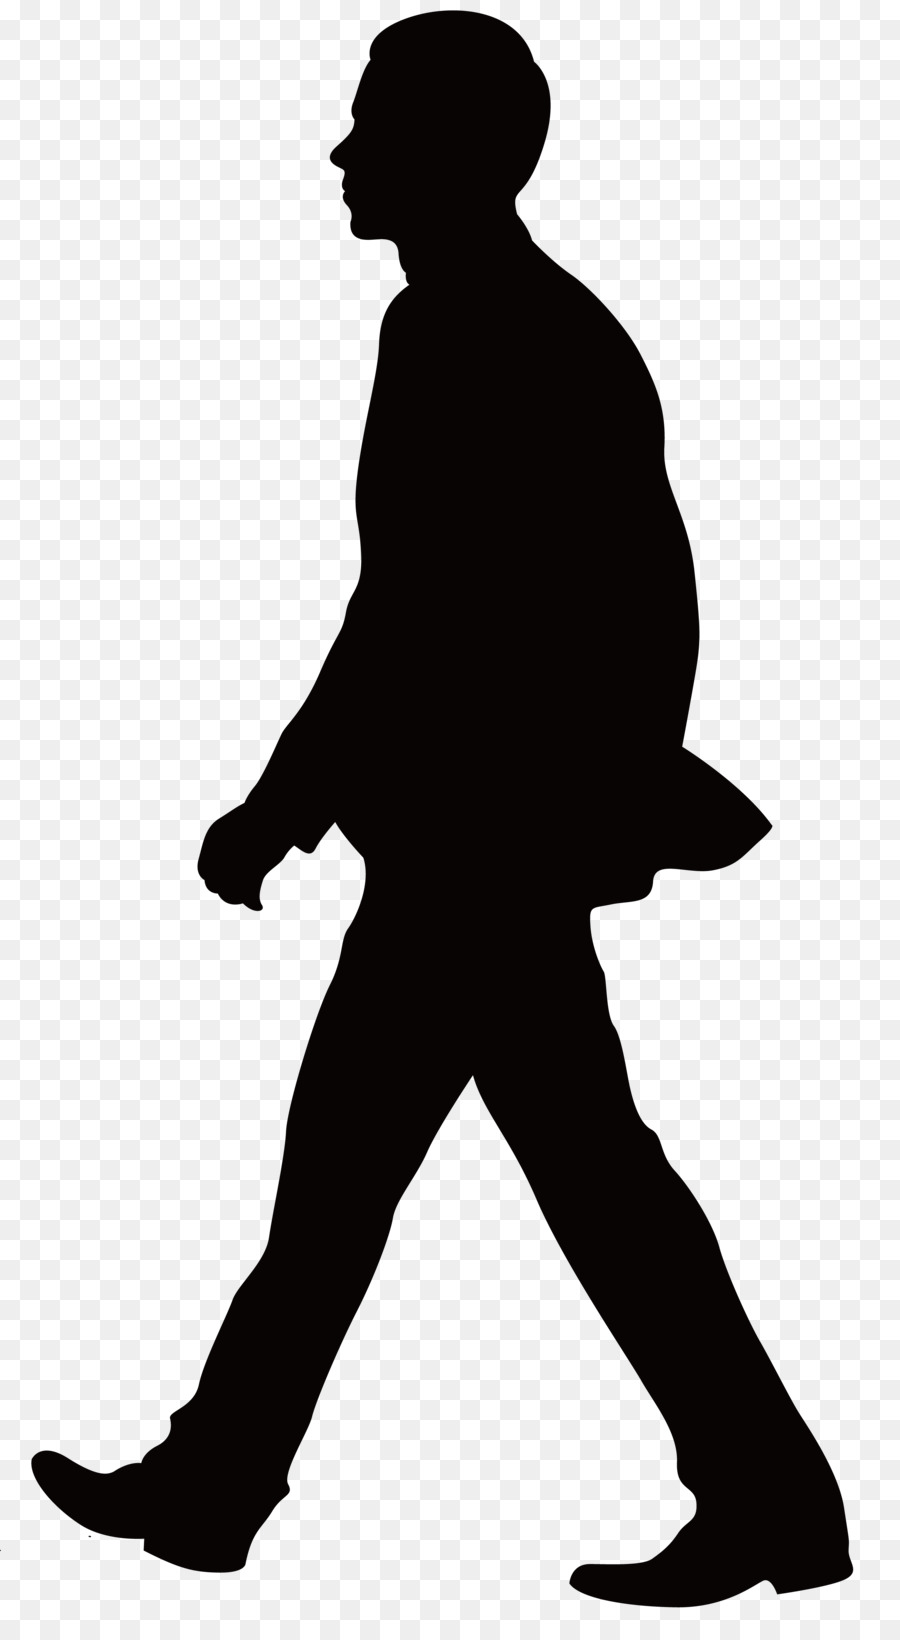 Silhouette Download - Man silhouette png download - 2657*4801 - Free Transparent Silhouette png Download.